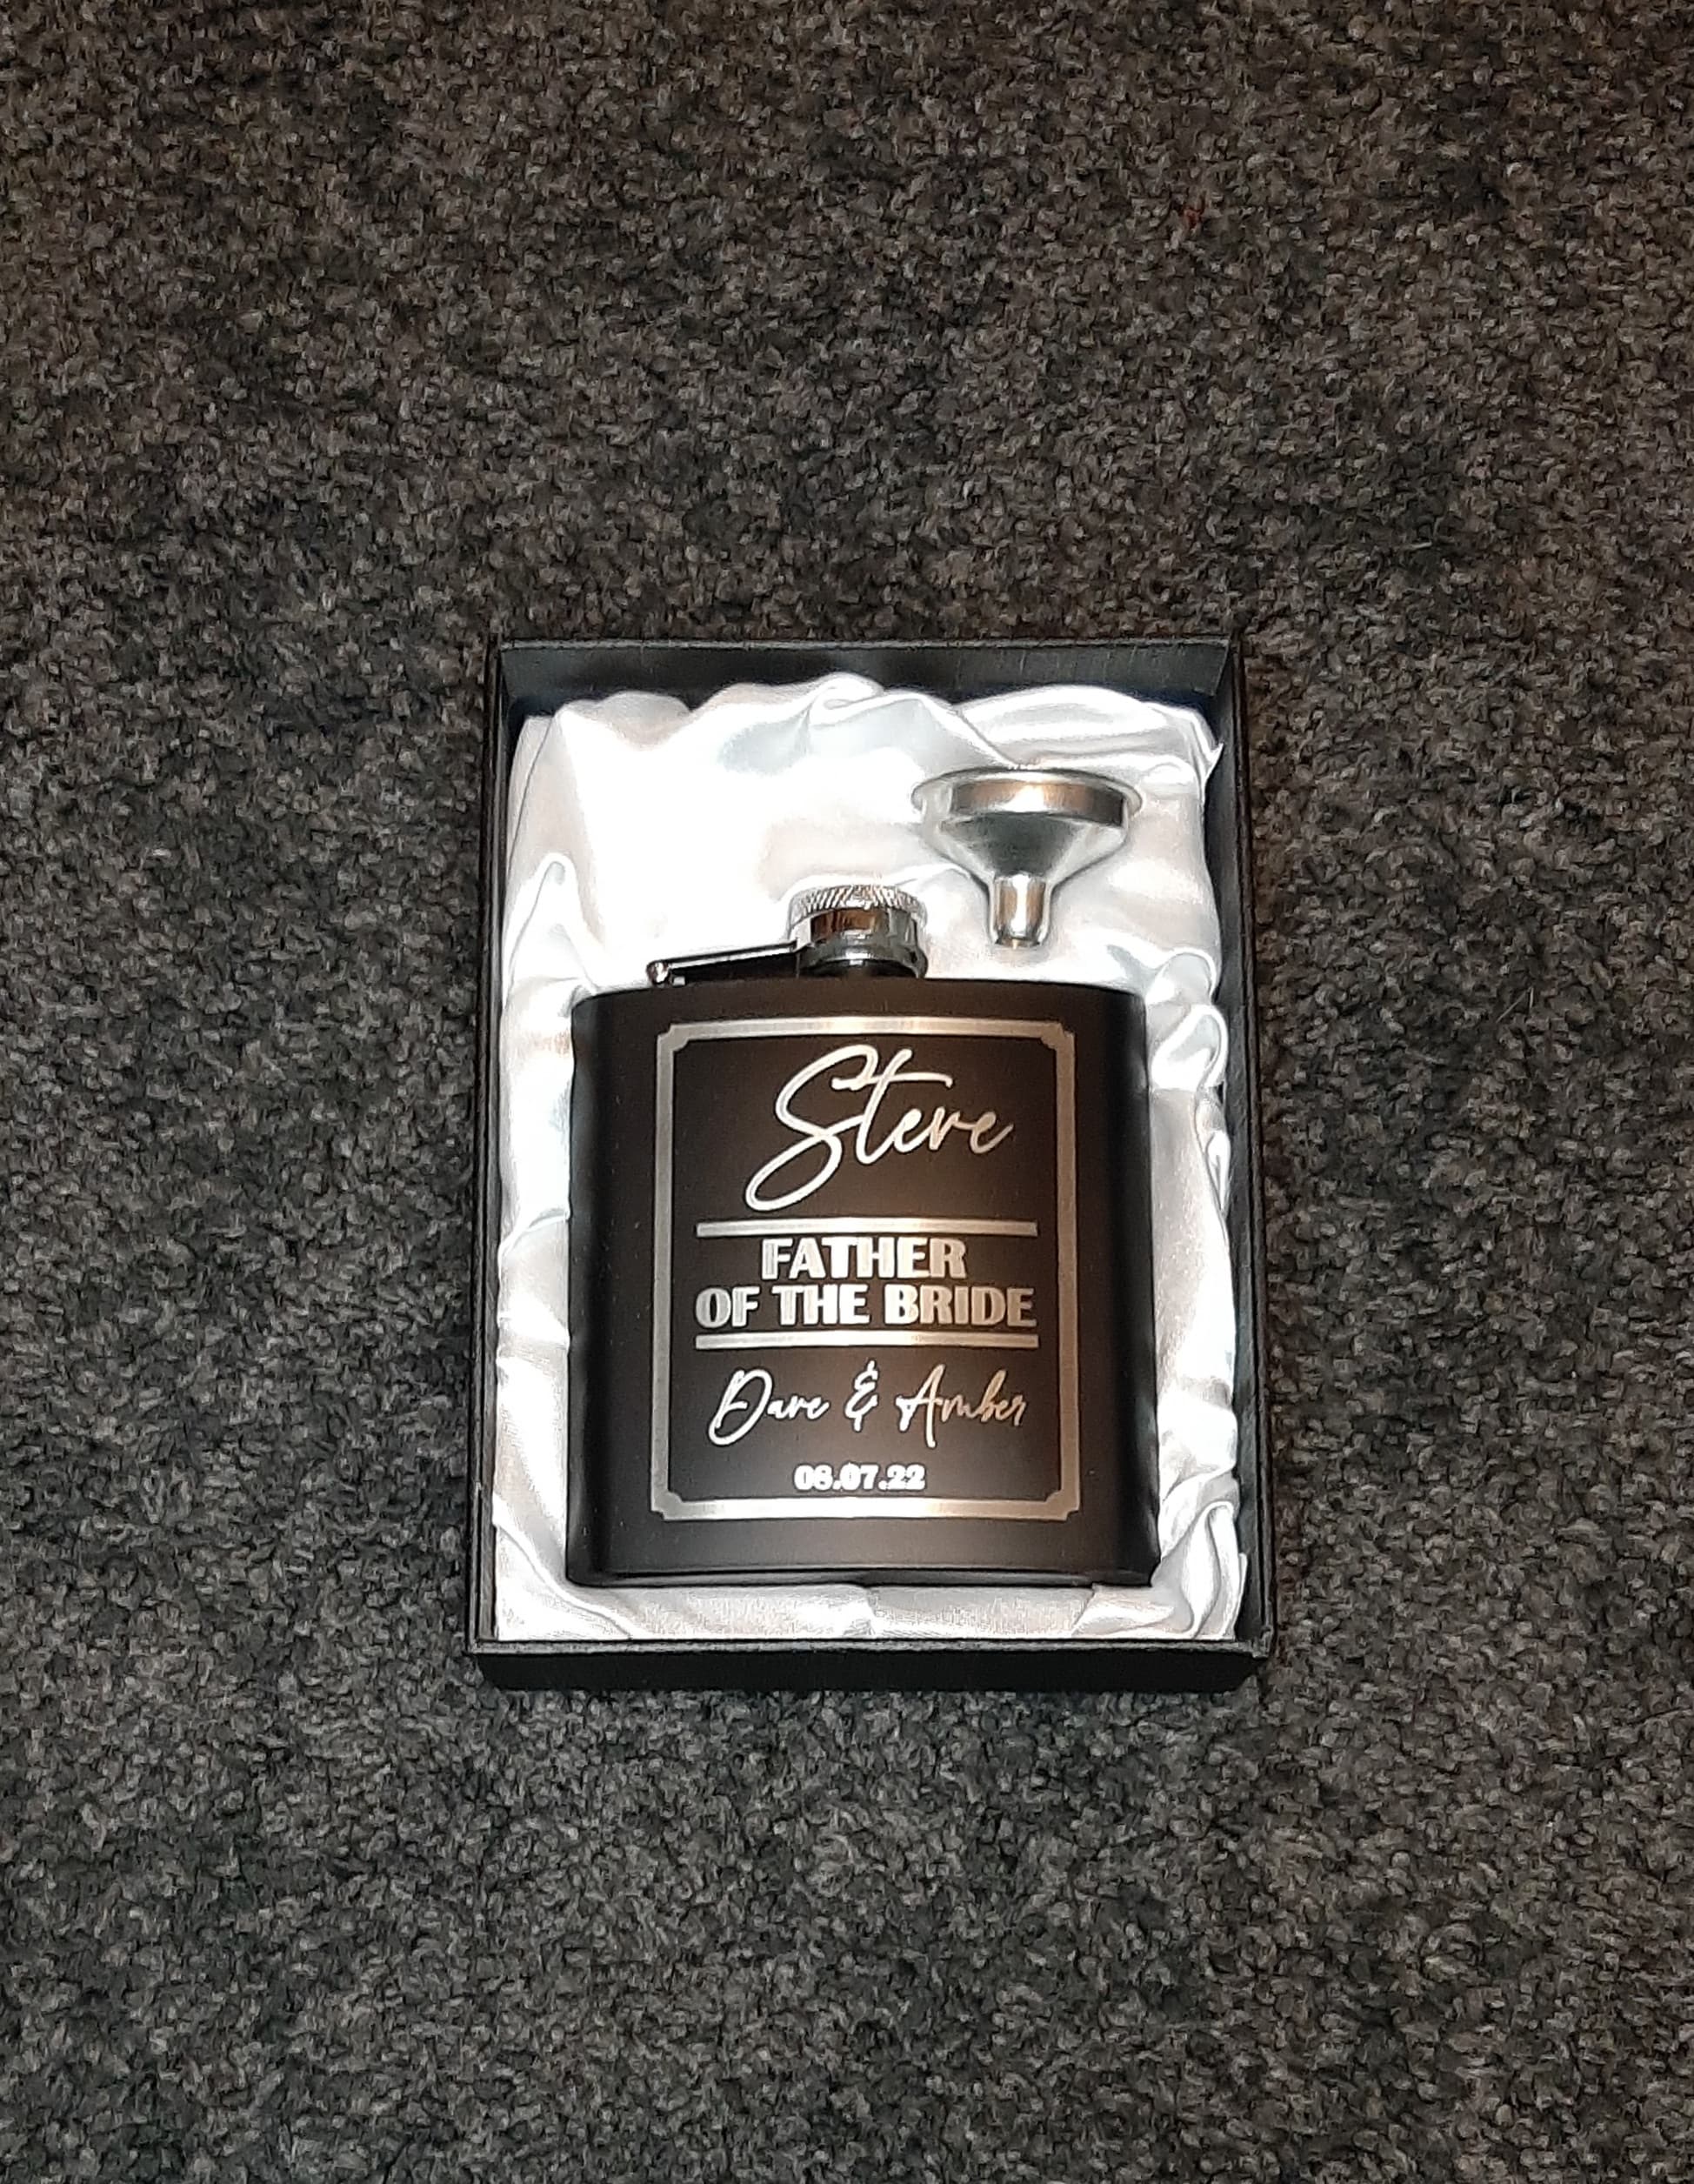 Wedding Hip Flask Gift Set mens wedding gift best man groom page boy grooms men gift occasion personalised with Name and date father of the bride